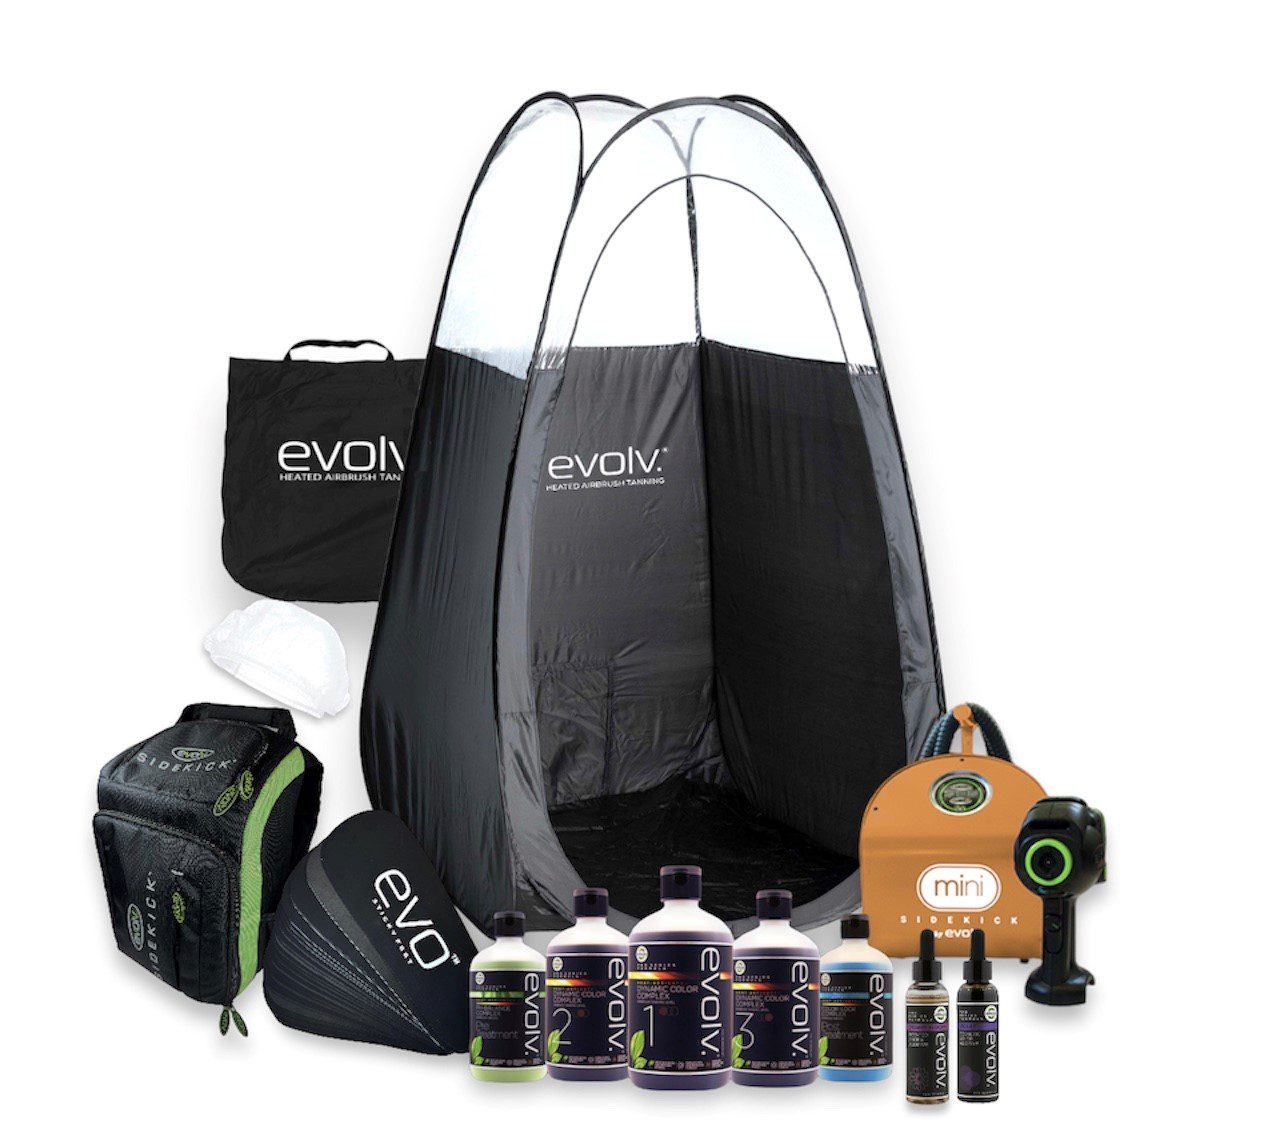 Full Sidekick Mini (Caramel) Business Kit with Pop Up Tent and Evolv Products